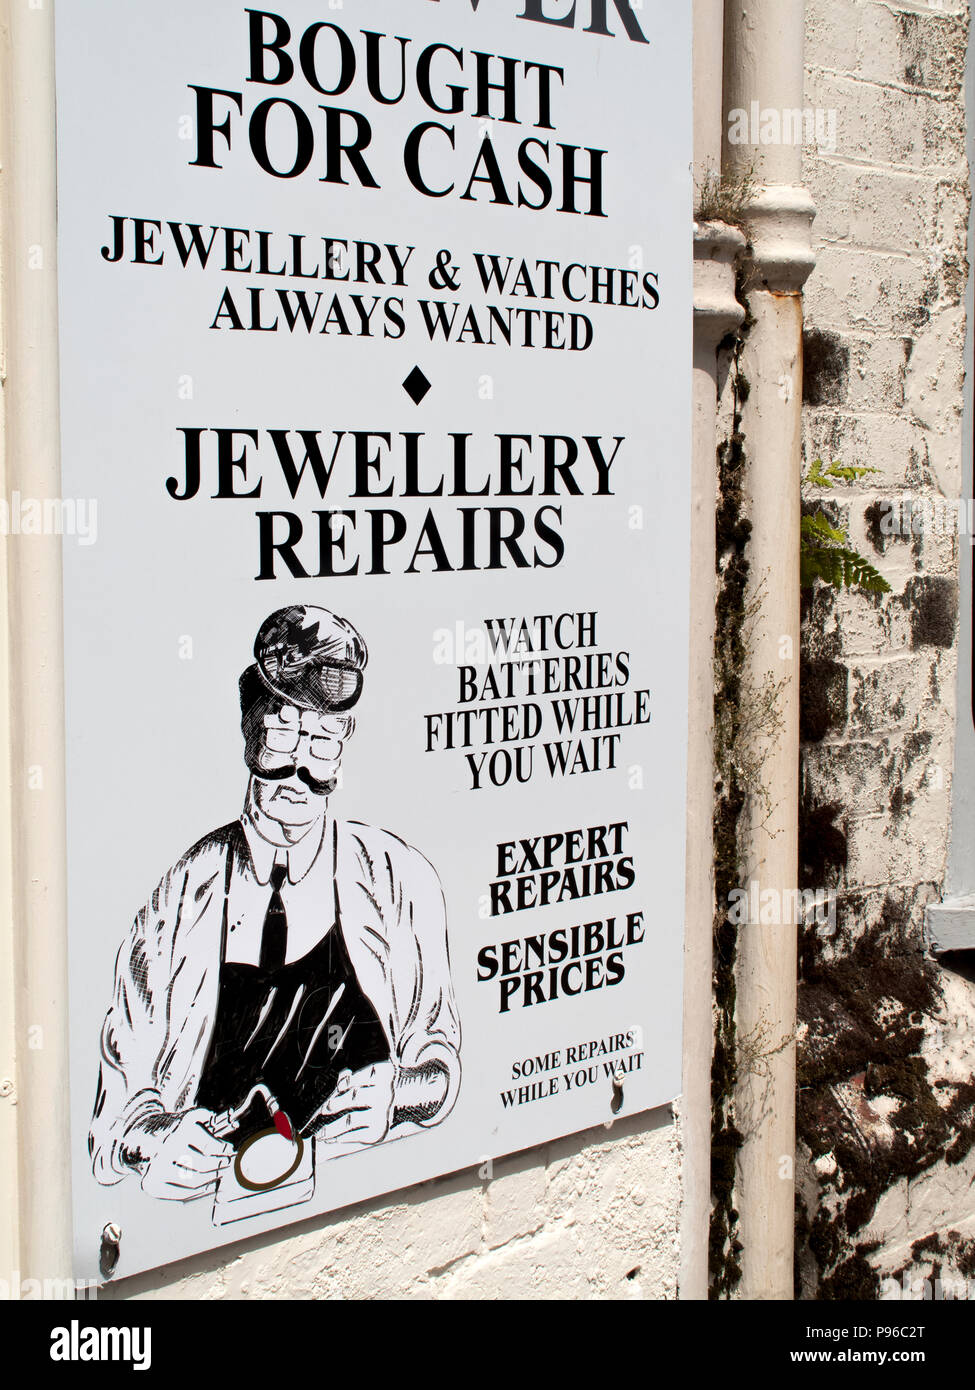 Sarum jewellers Professional Services, repairs in their own workshop advertising board Stock Photo